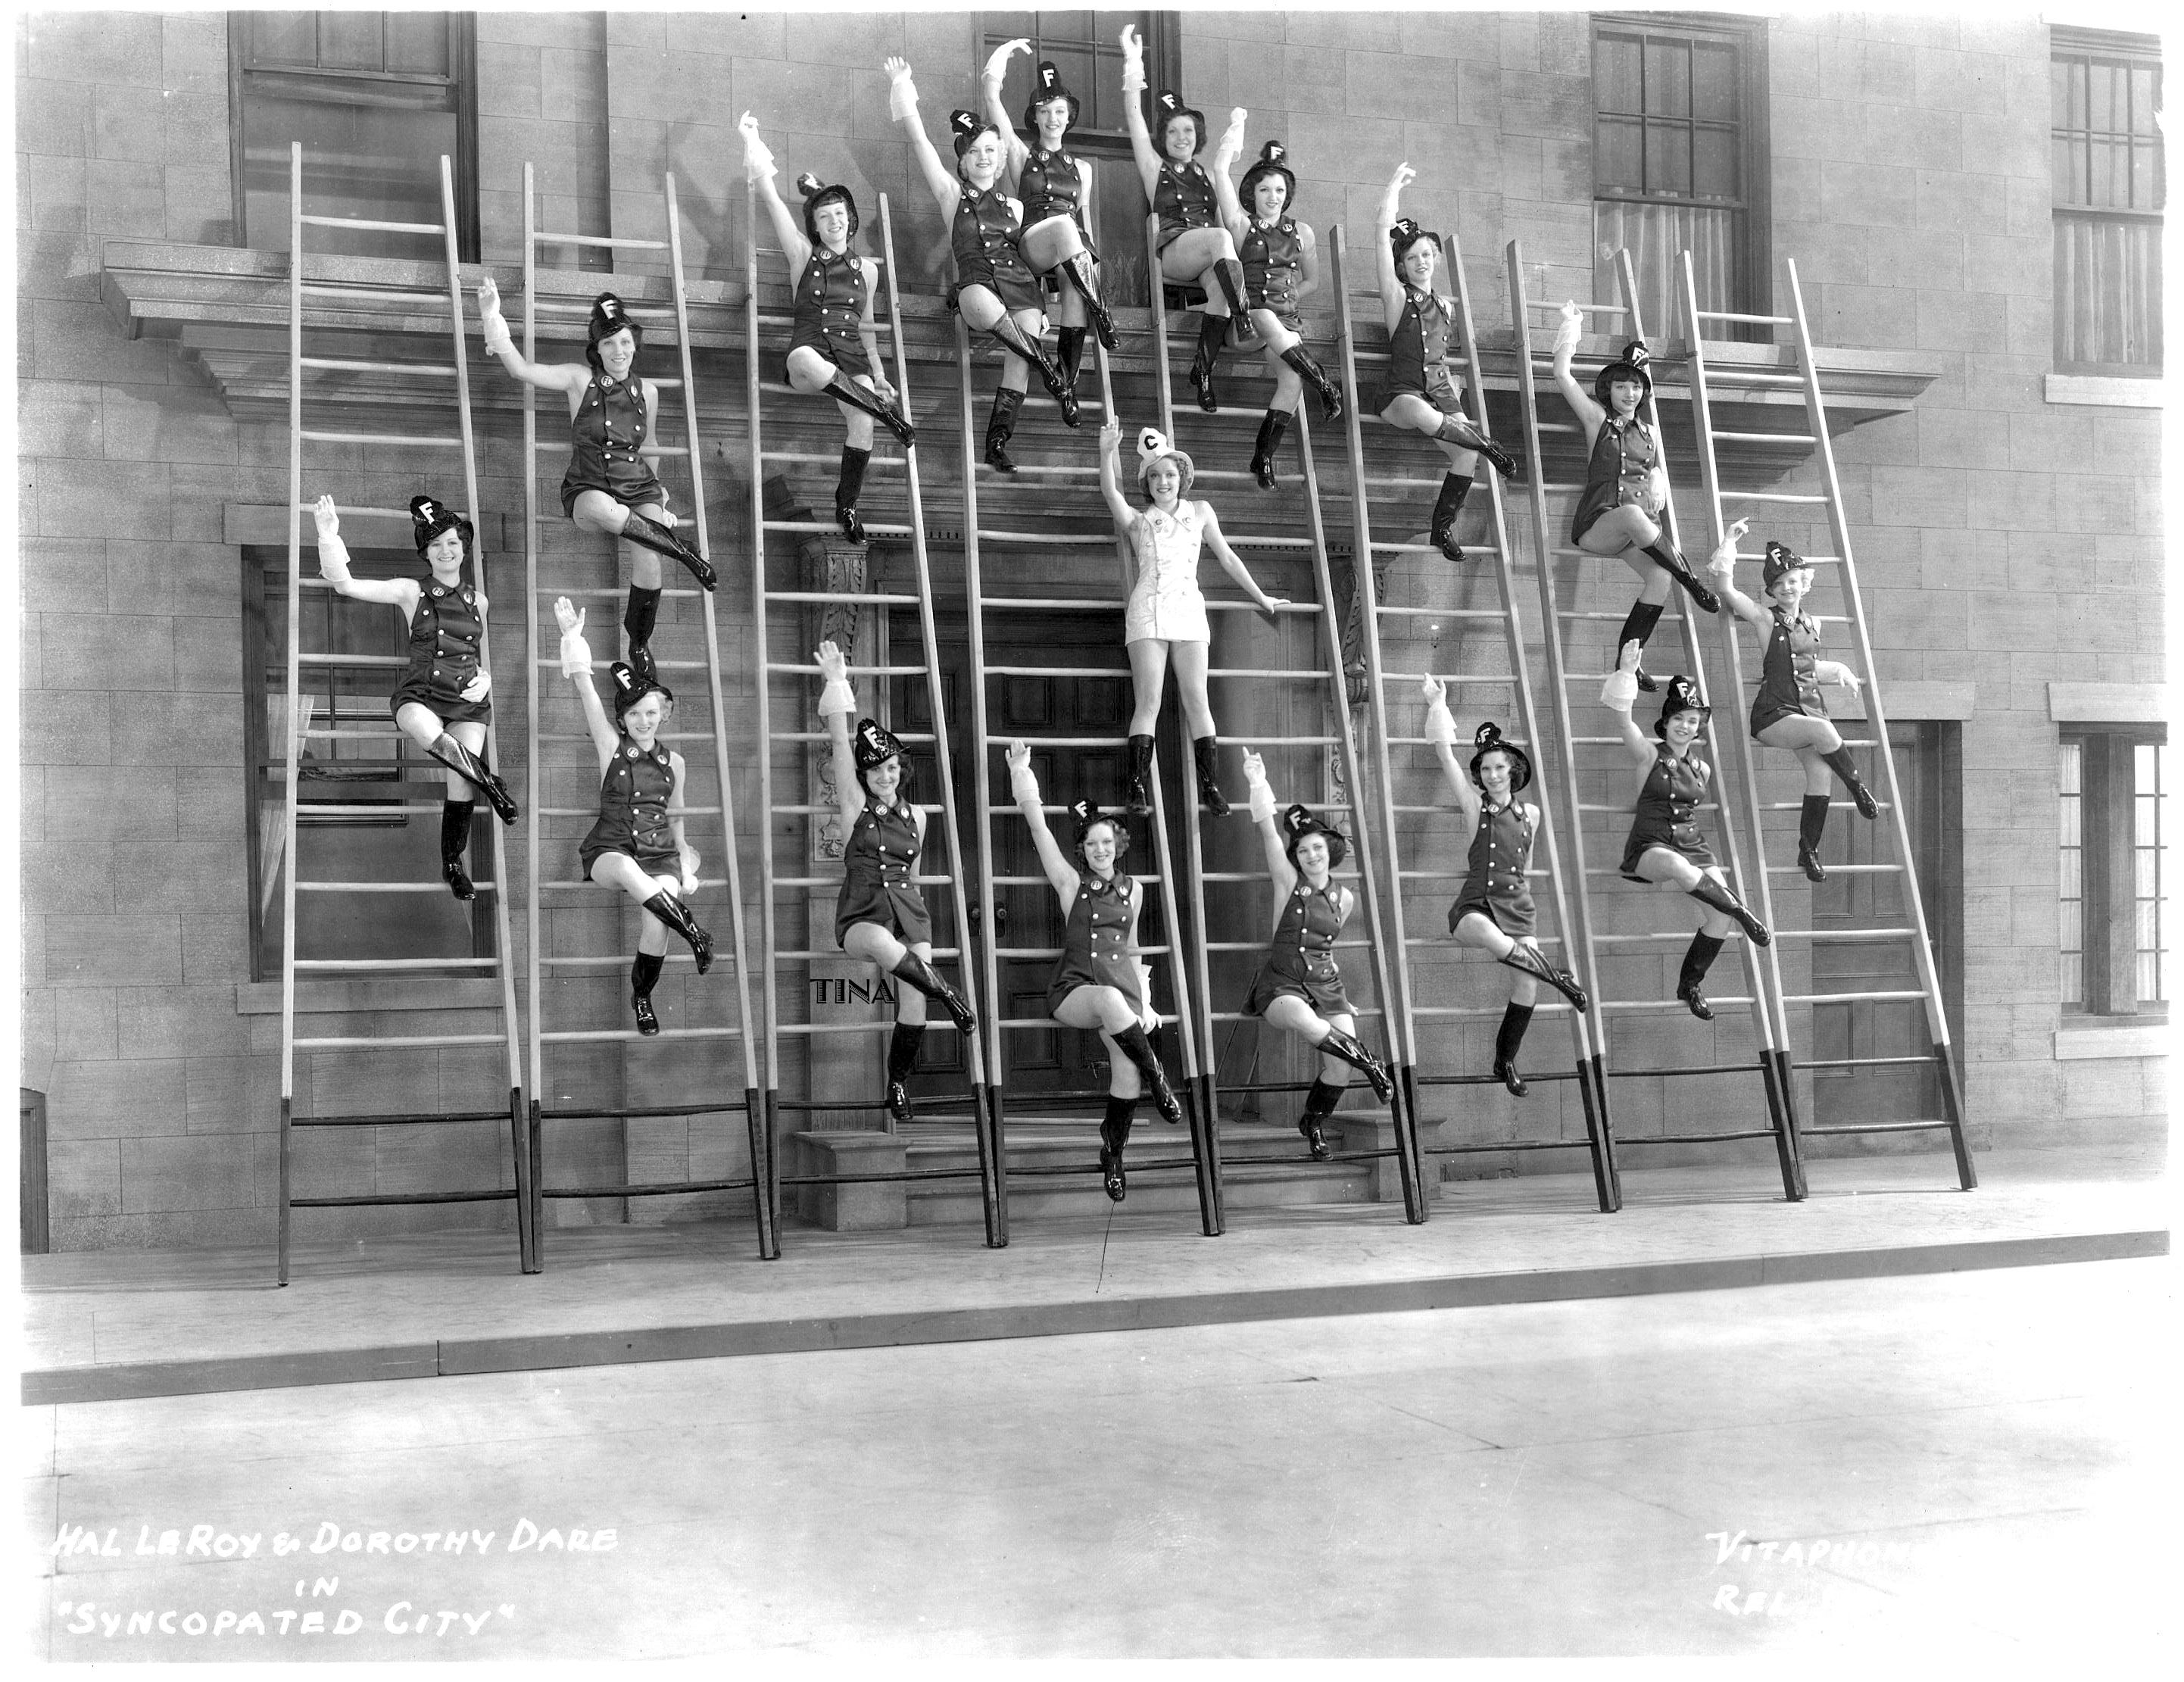 Tina, third from the left in the first row, in Syncopated City (1933).